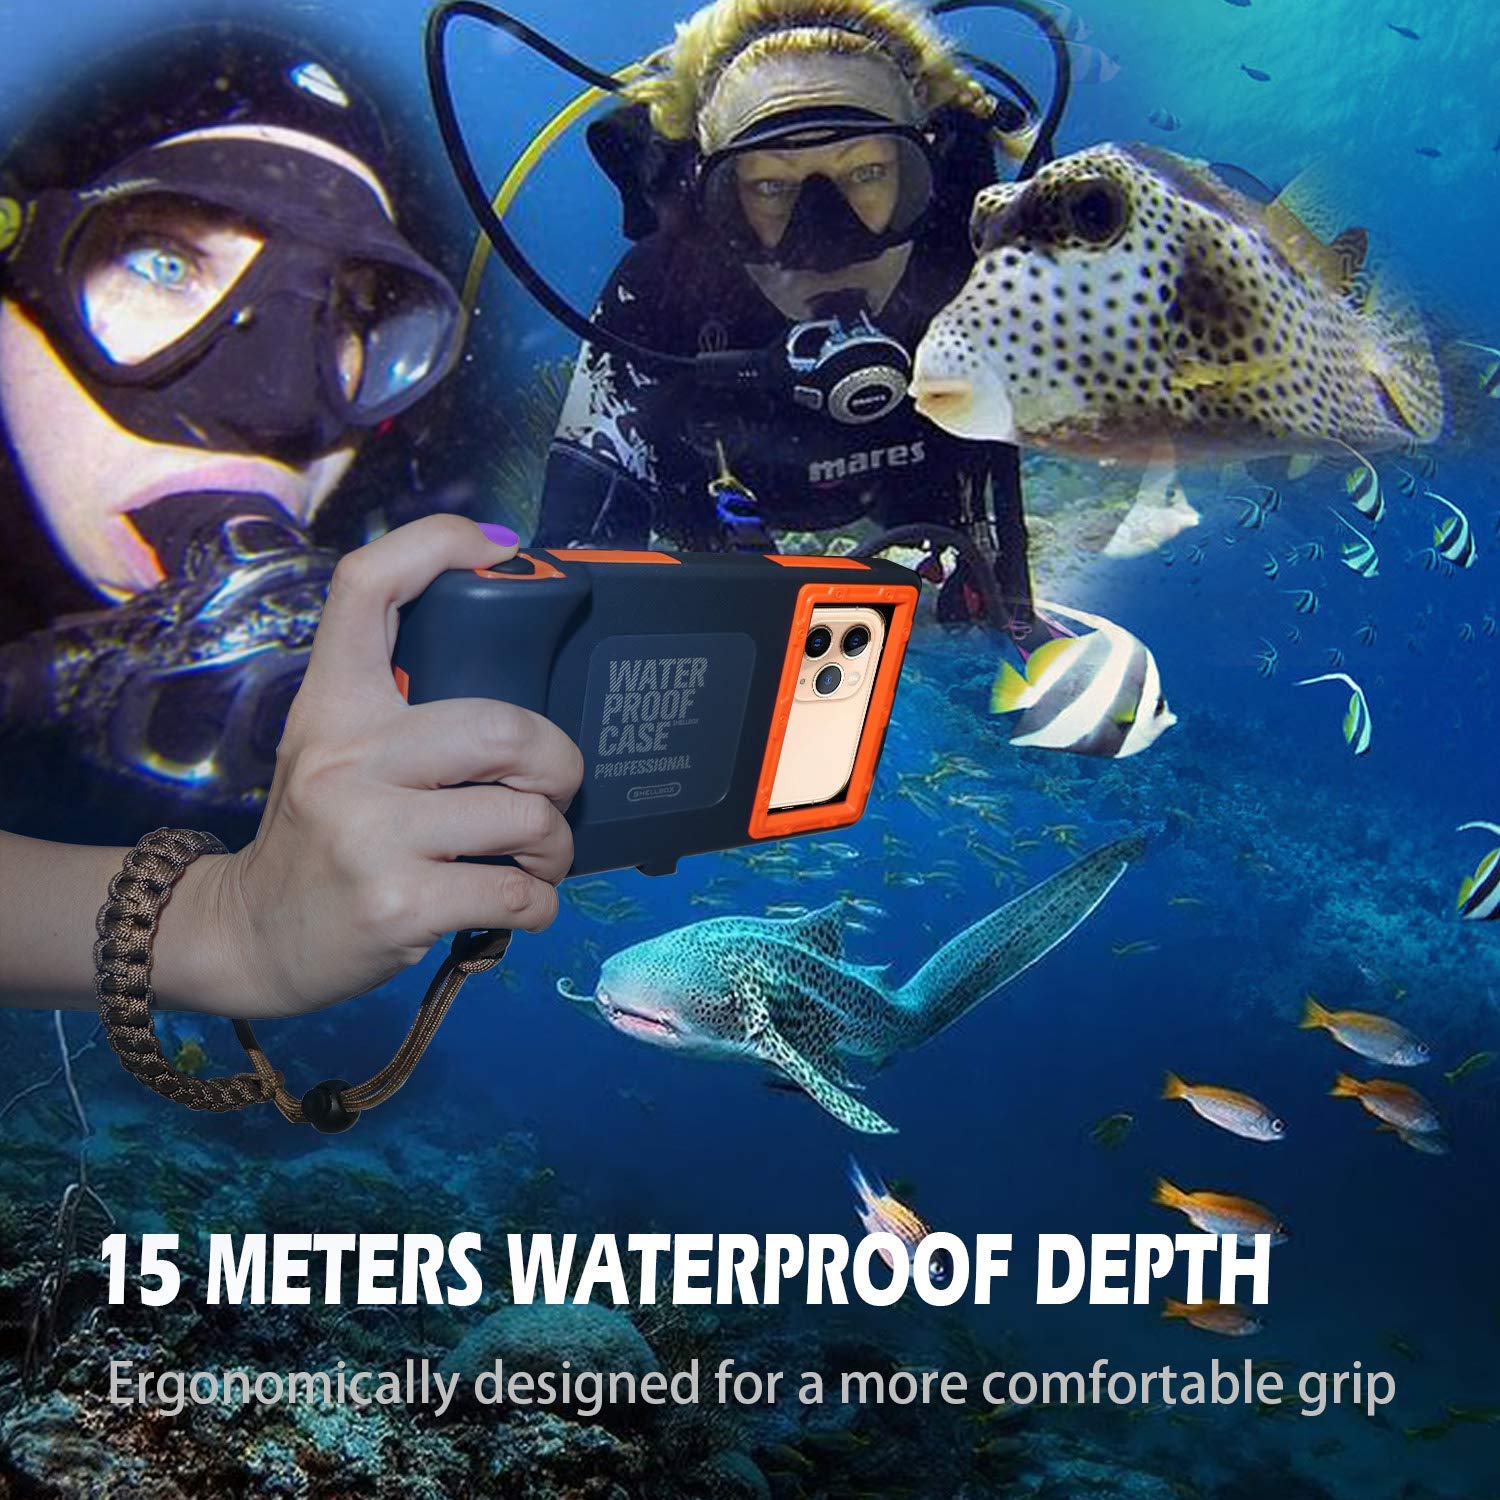 Willbox Professional [15m/50ft] Diving Surfing Swimming Snorkeling Photo Video Waterproof Protective Case Underwater Housing for Galaxy and iPhone Series Smartphones with Lanyard (Orange)